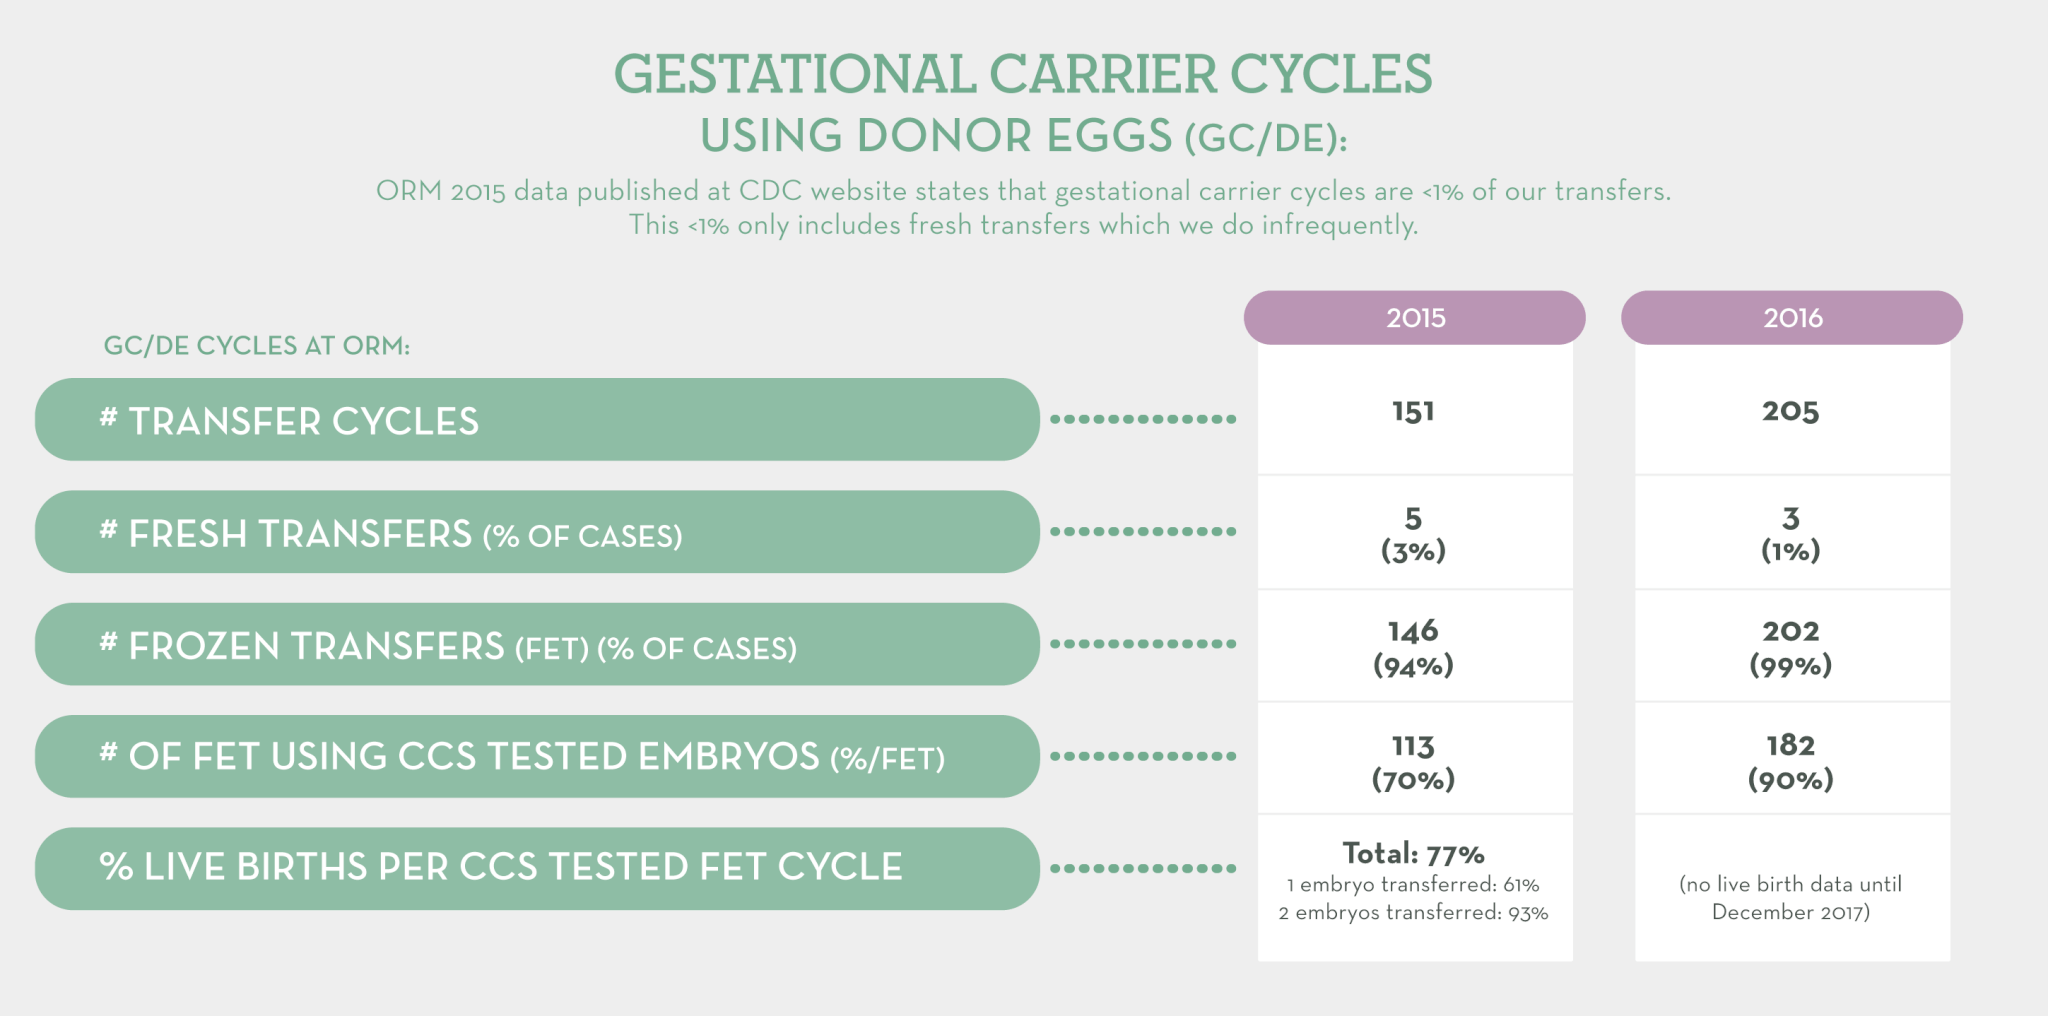 Gestational Carrier Cylces